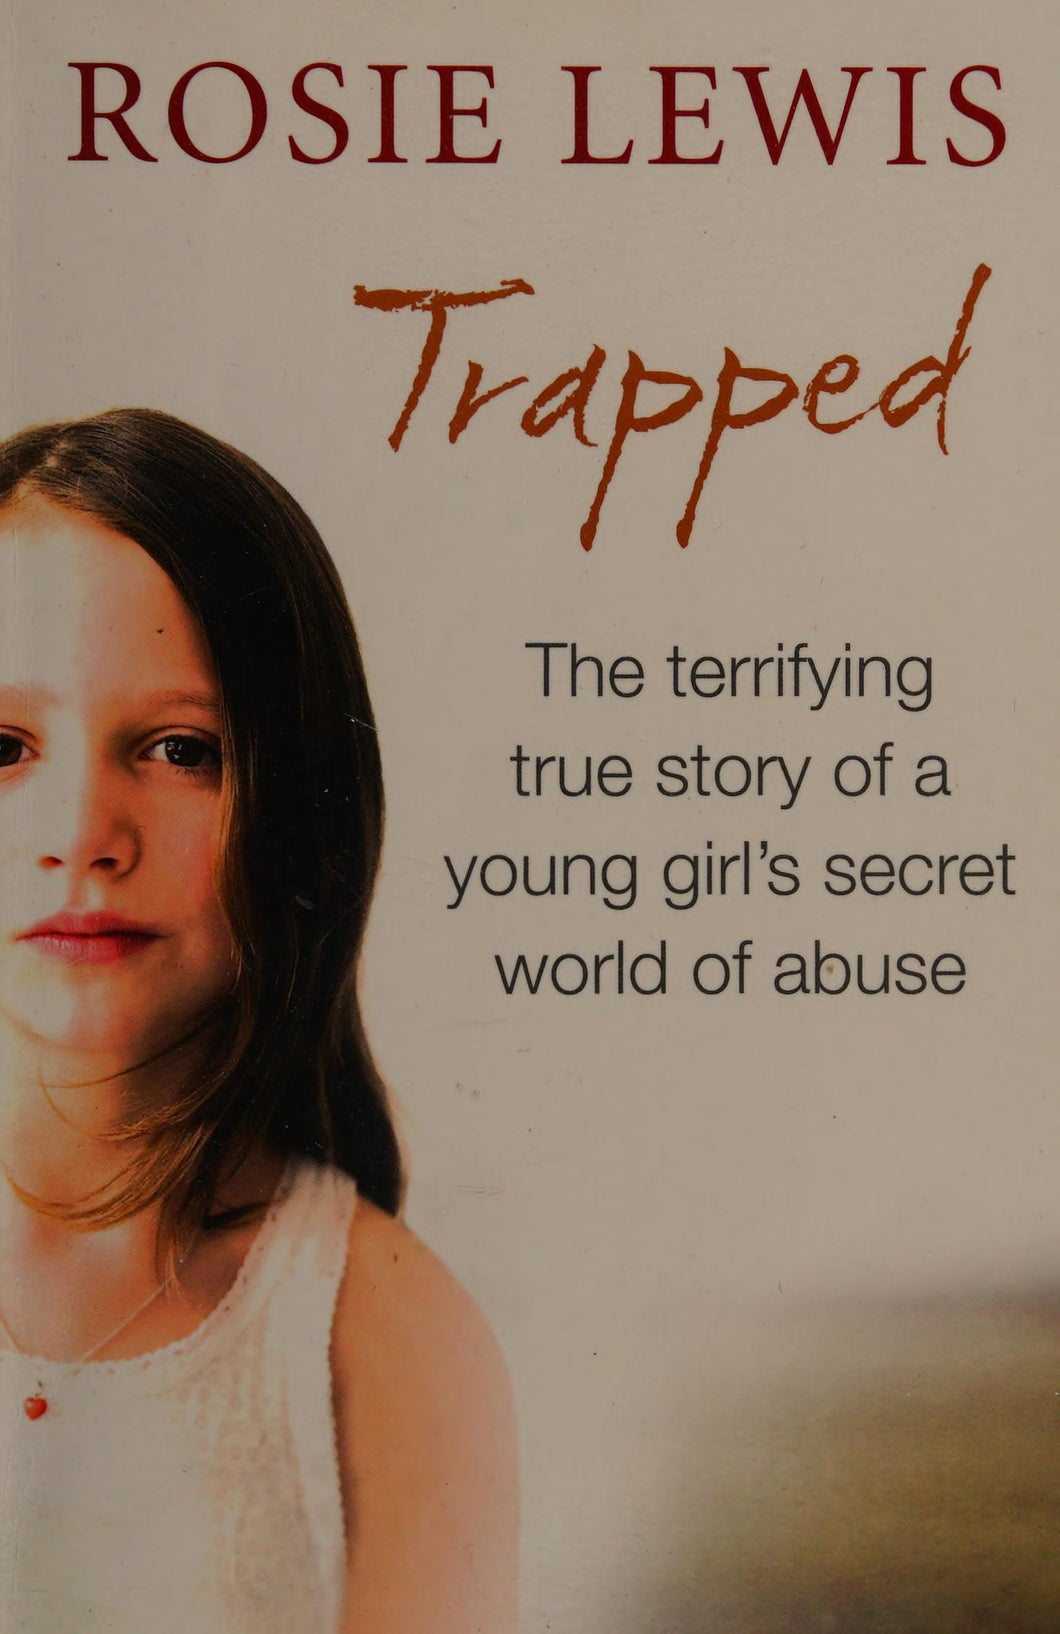 Trapped: The Terrifying True Story Of A Secret World Of Abuse